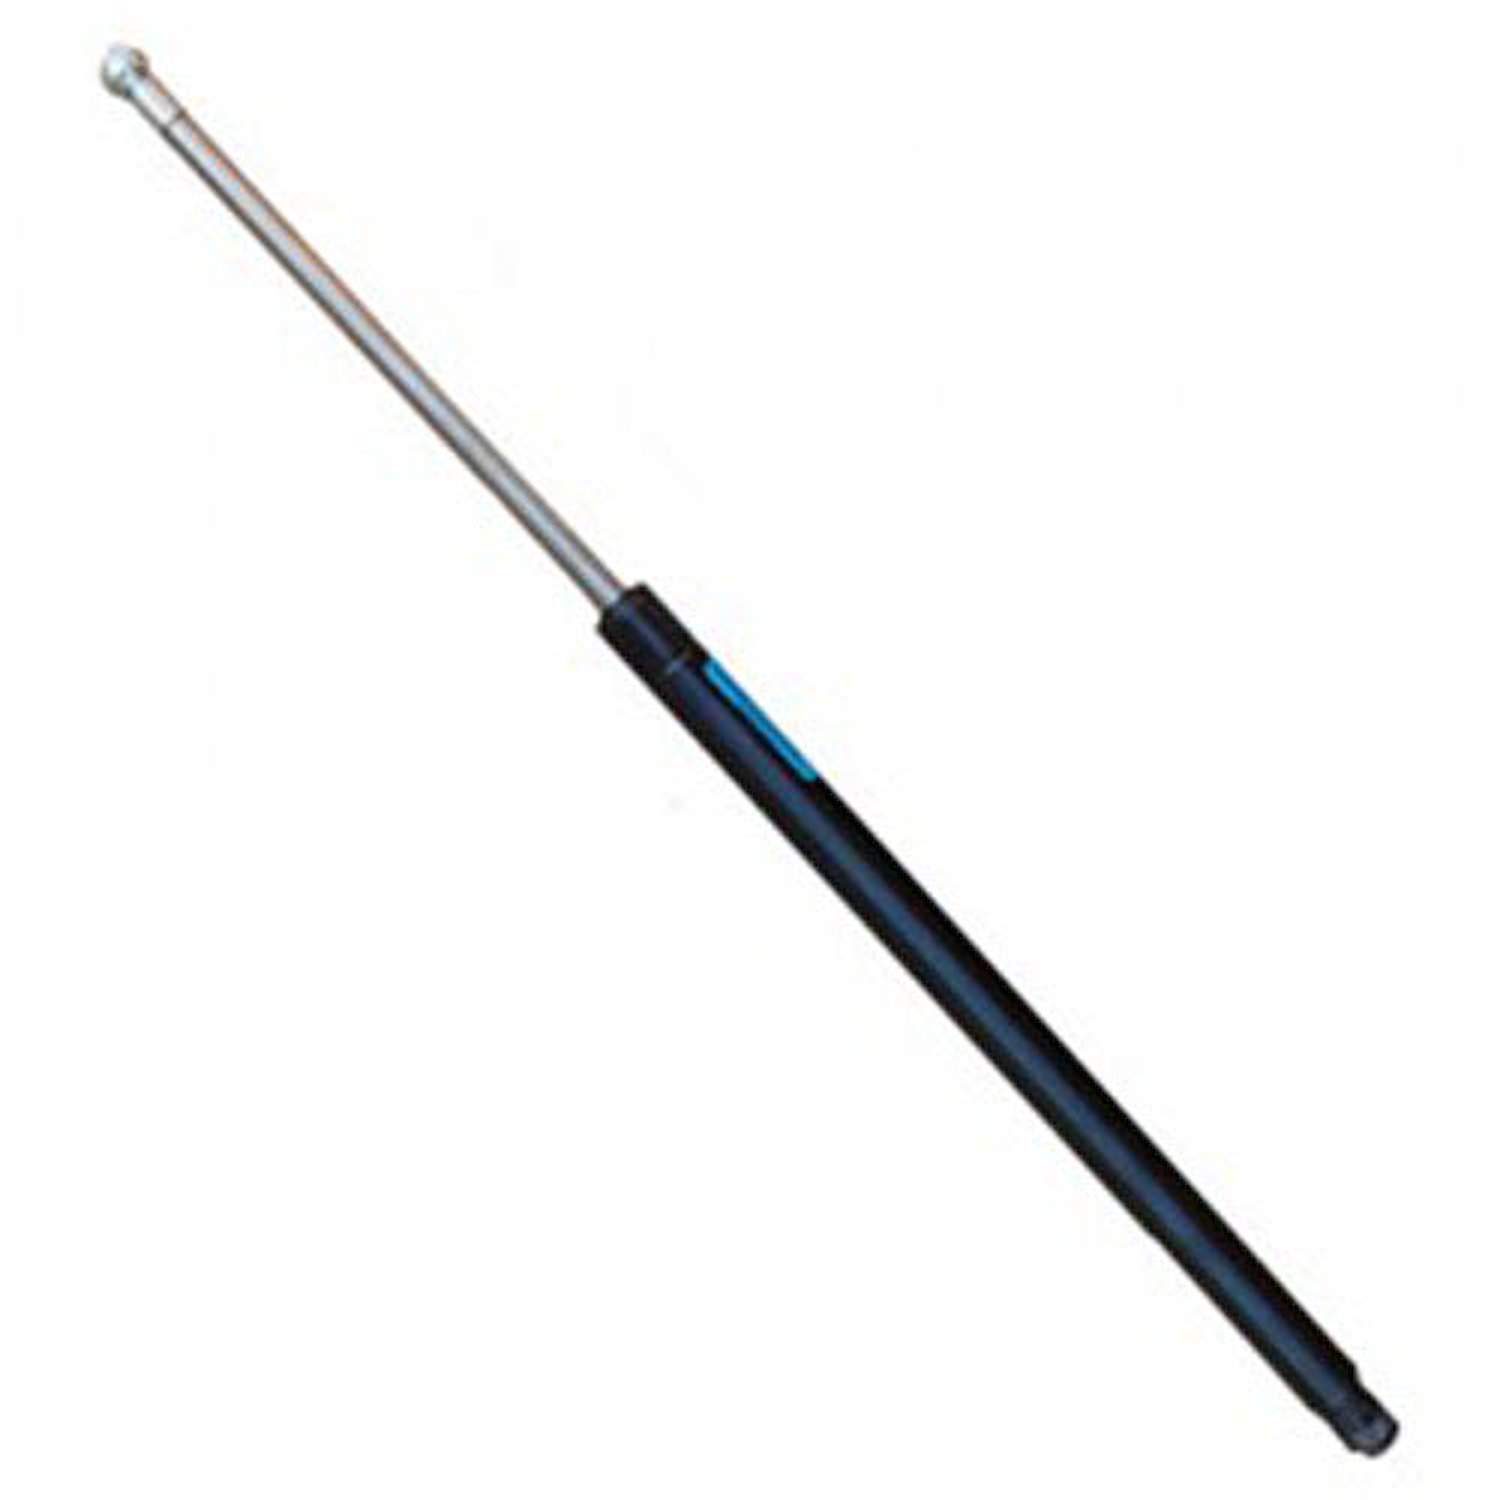 Replacement gas strut from Omix-ADA, Fits liftgate on 95-96 Jeep Cherokee XJ Will fit left or right side.